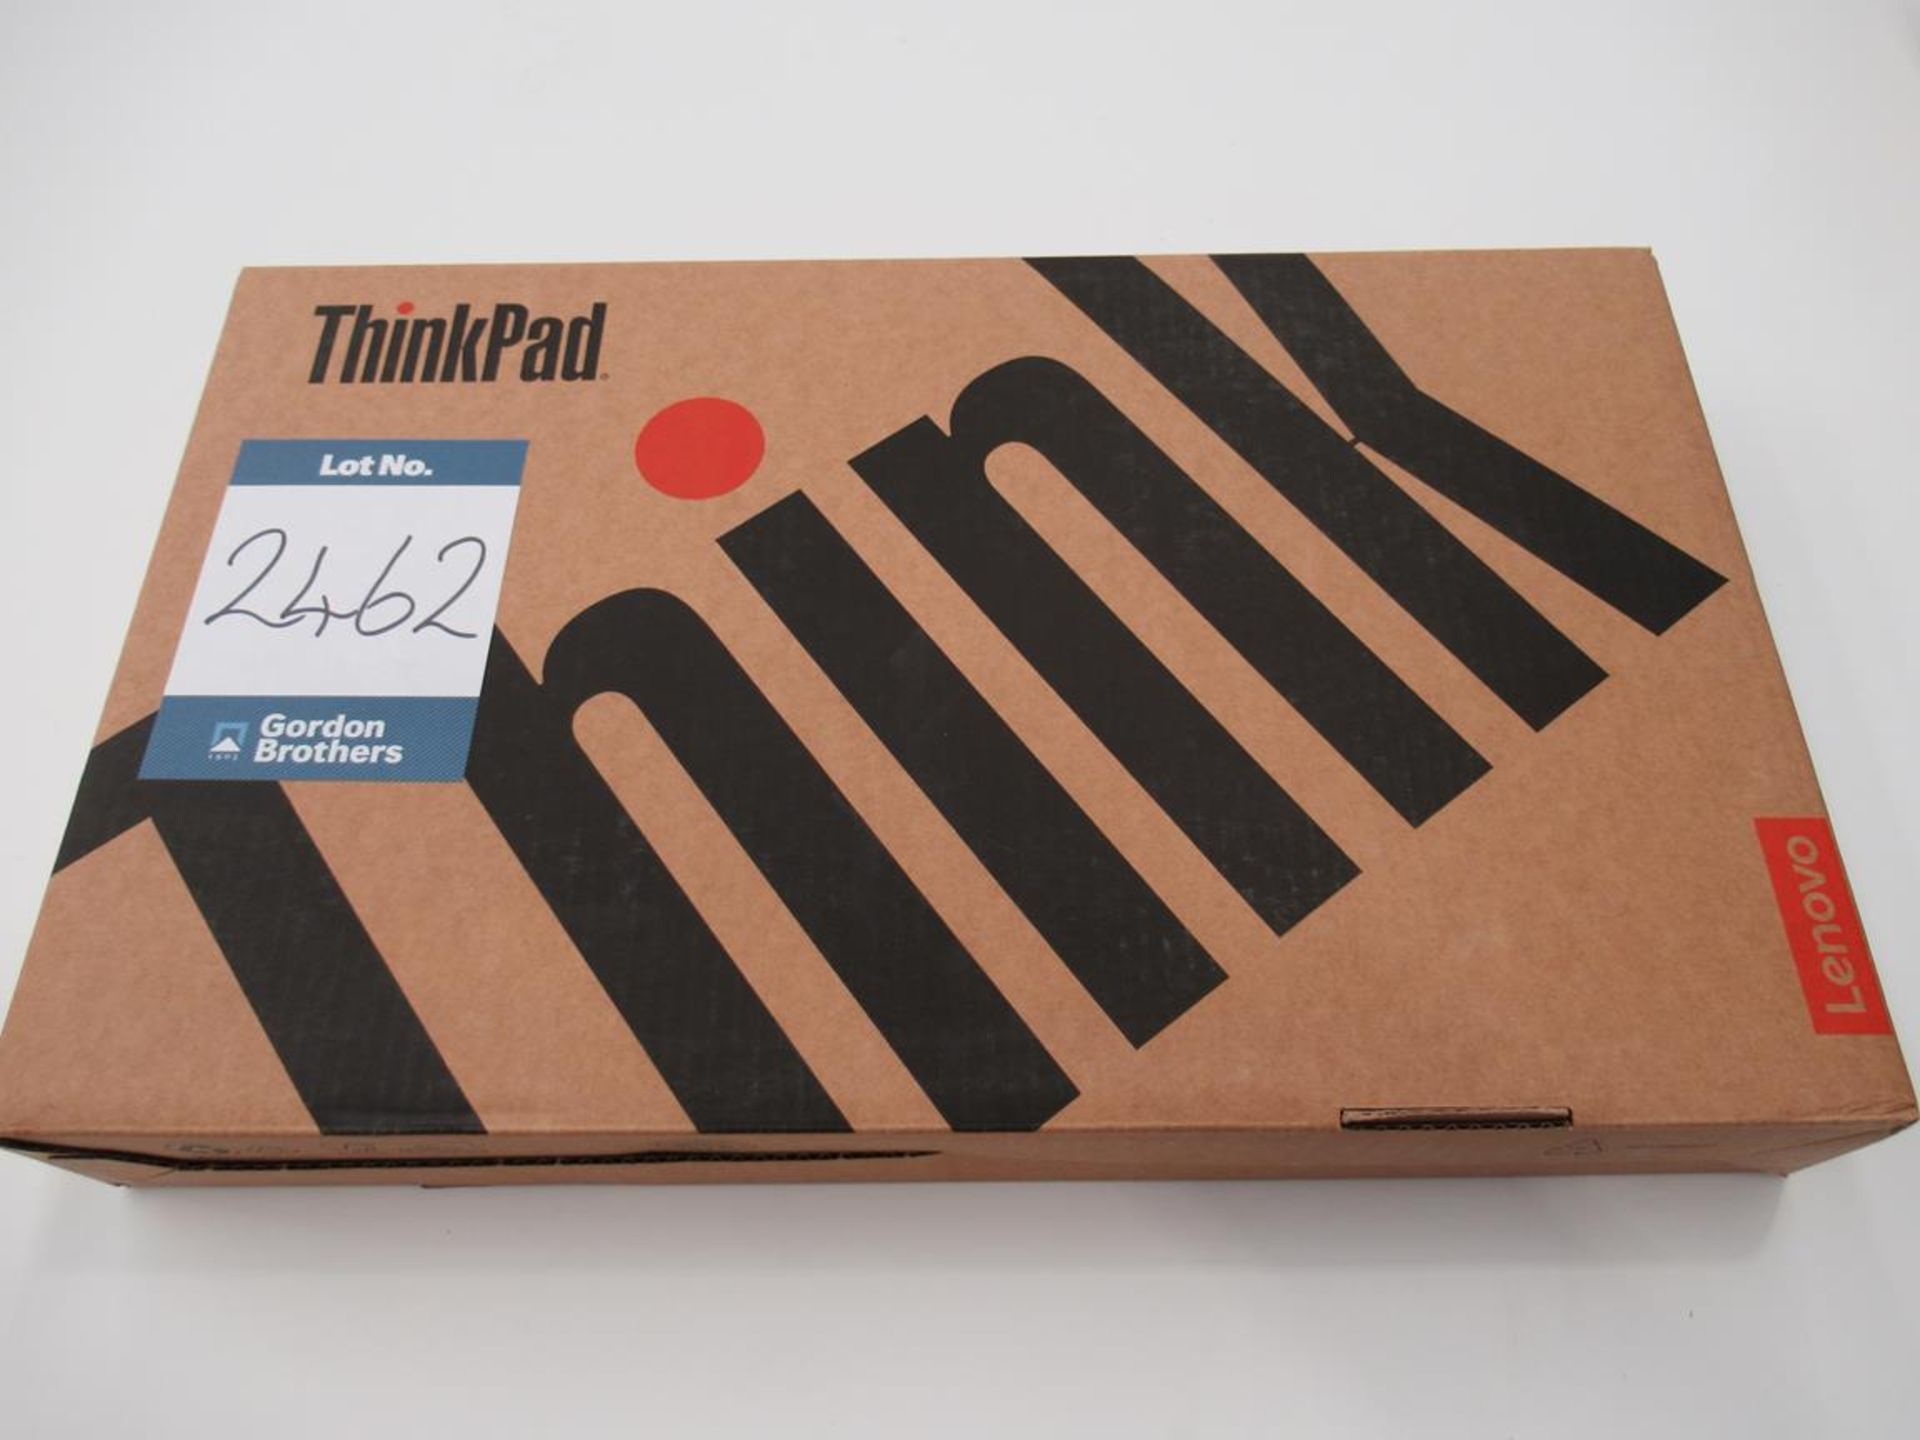 Lenovo, Thinkpad P1 Gen 4 CAD specification (boxed) - Image 2 of 4